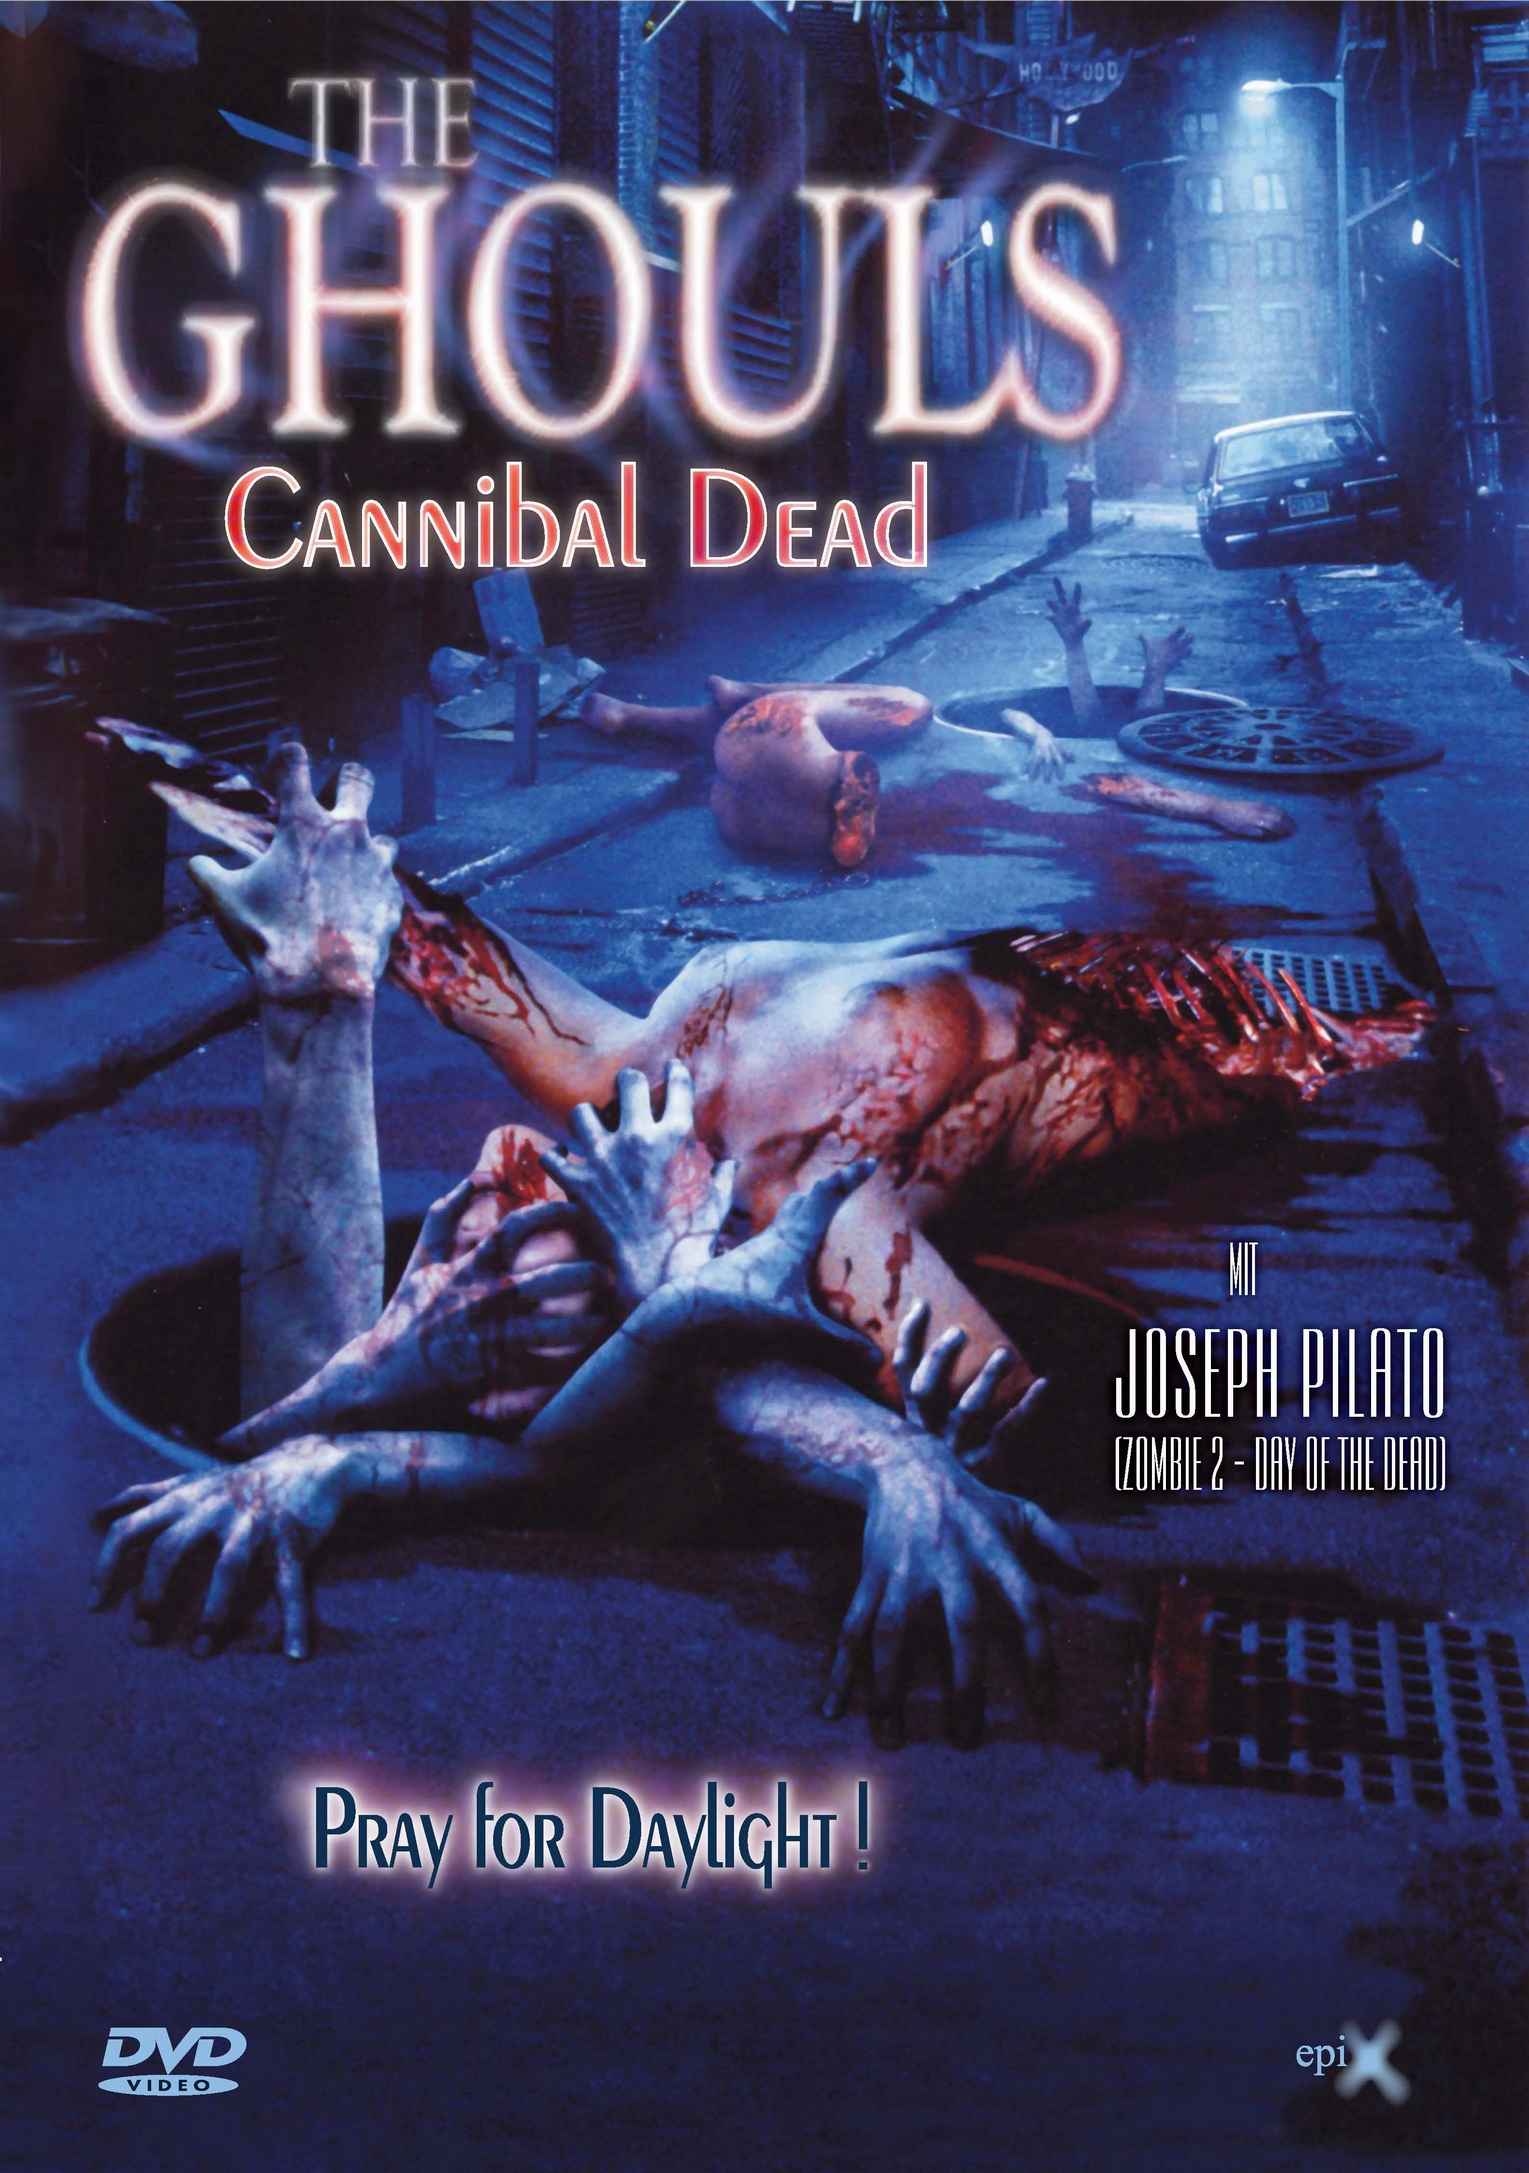 GHOULS Frontcover FINAL